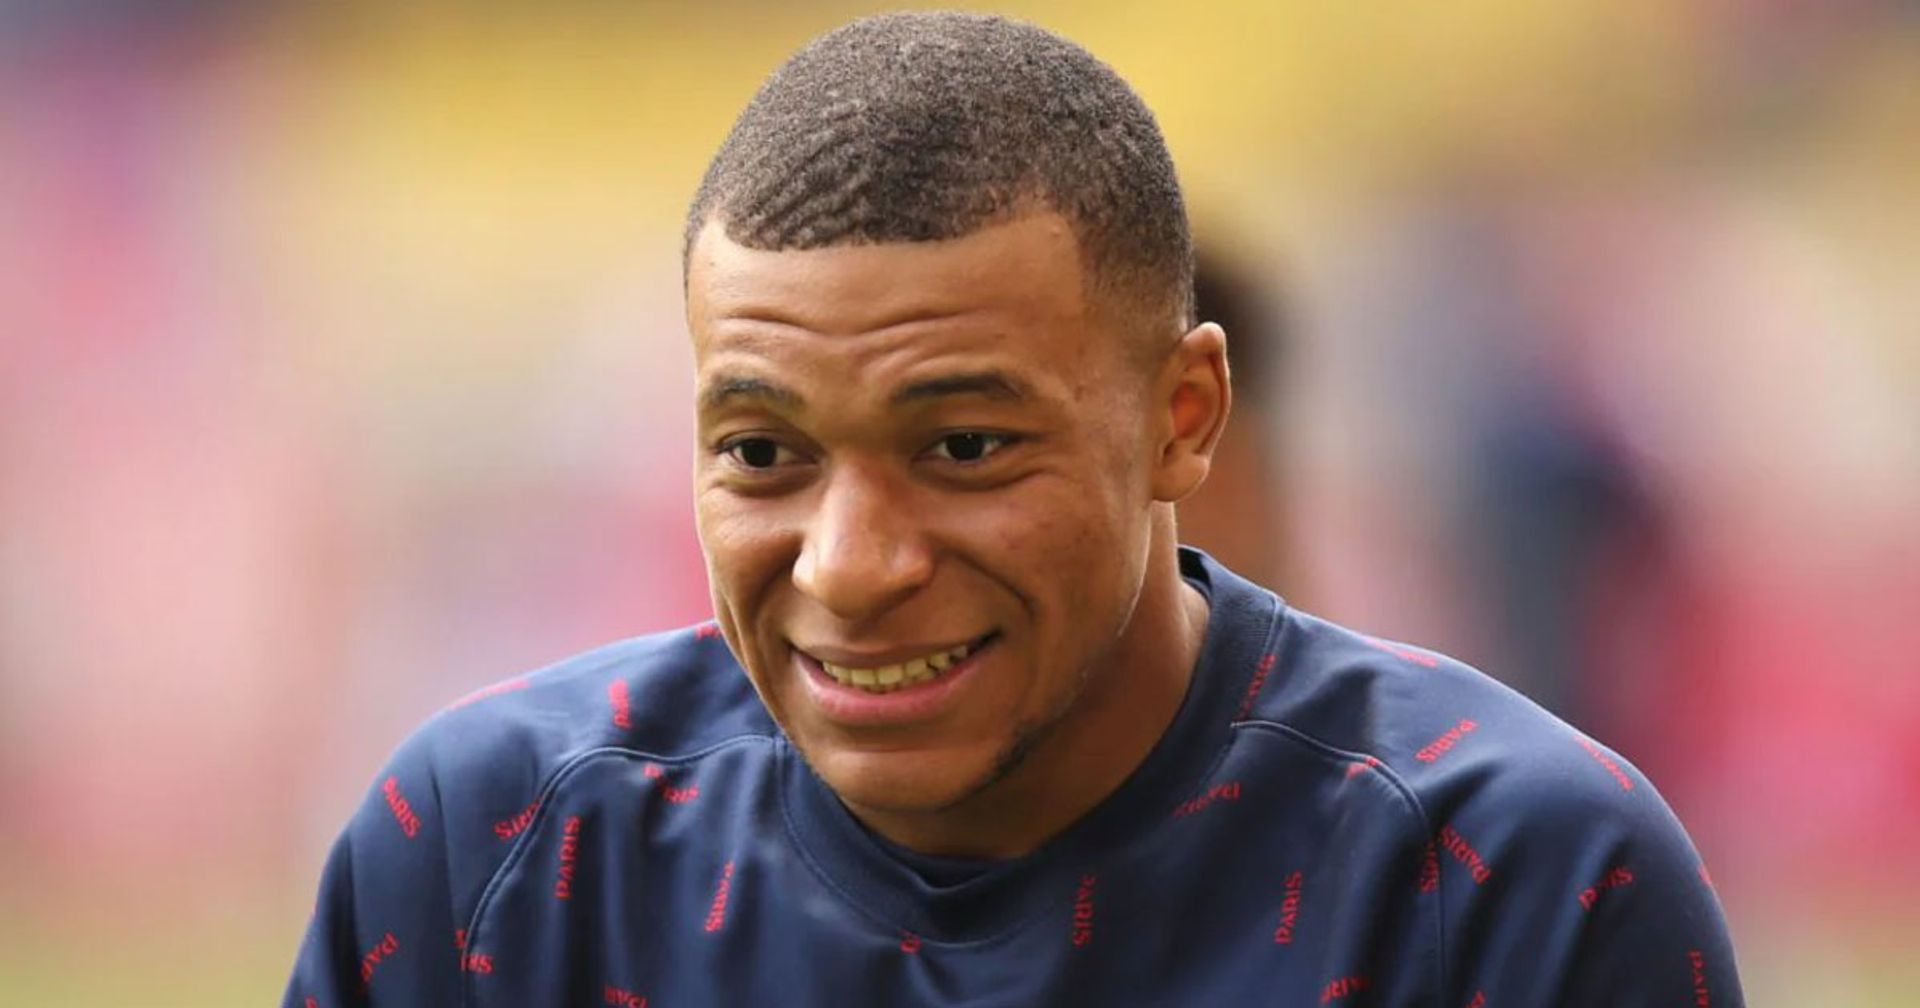 €100m loyalty bonus, 2+1 year deal & more: PSG's latest gigantic contract offer to Mbappe revealed